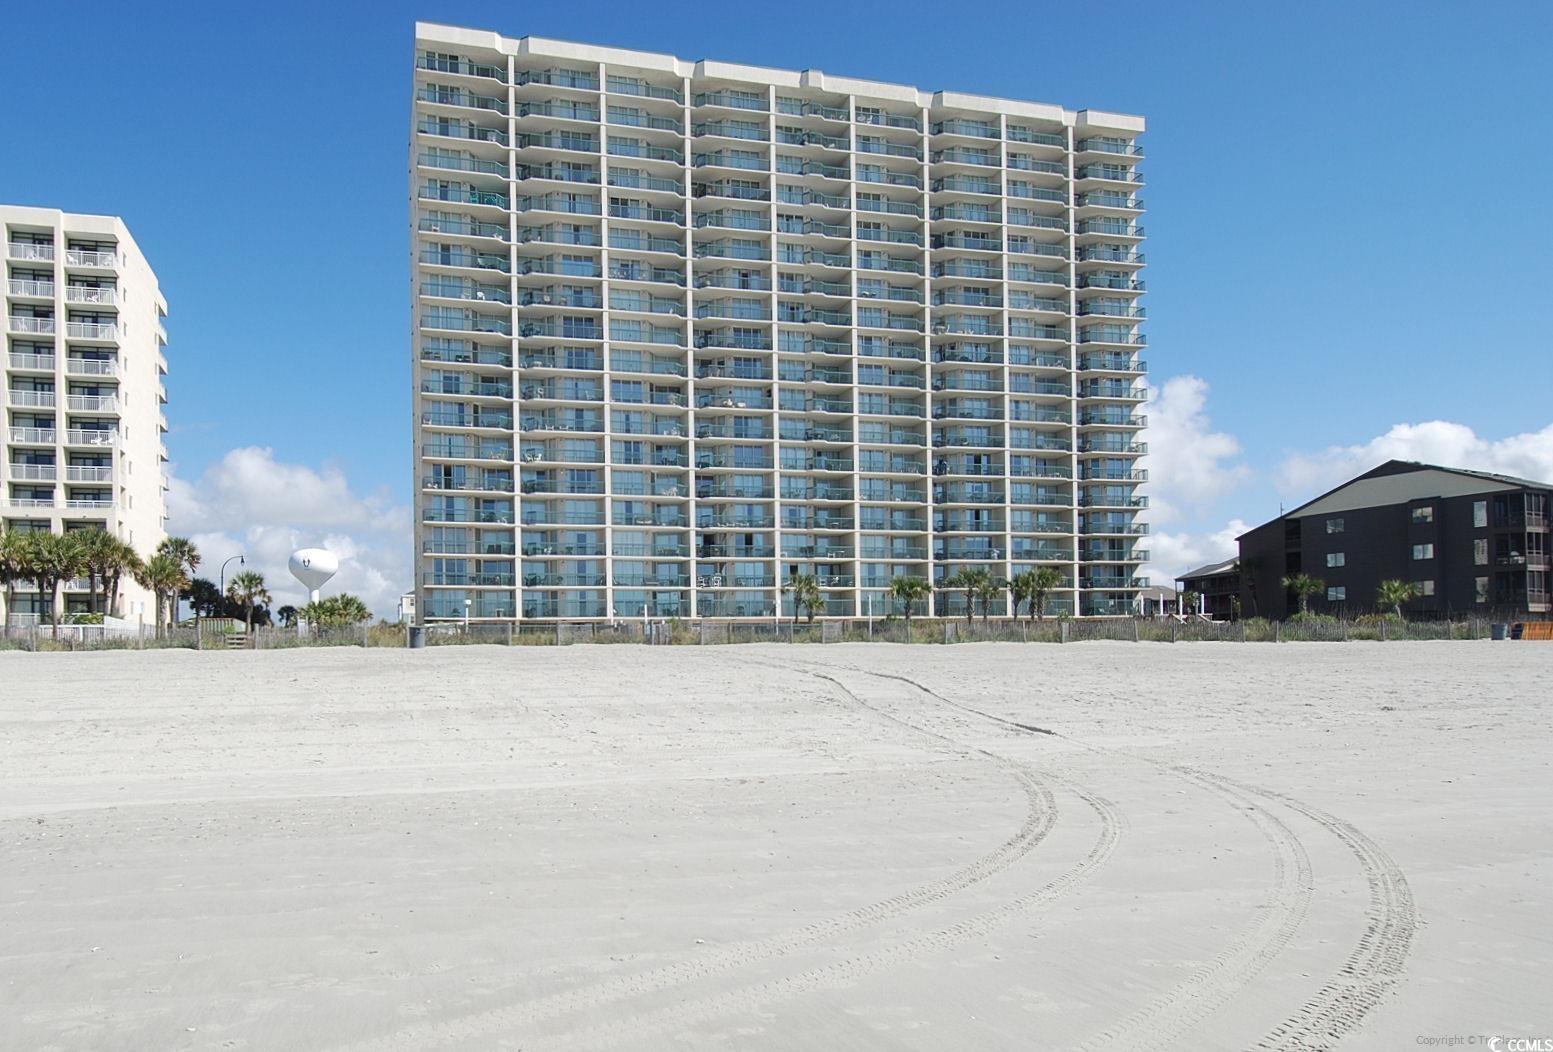 must see! direct oceanfront 3 bedroom, 3 full bath condo with lots of room. owning in the ashworth, north myrtle beach is a rare opportunity. there are breath taking views from this 7th floor home on the beach. access the large balcony from both the living room and large primary suite. this spacious condo also includes large kitchen with stainless appliances, a full size washer and dryer and a pantry. there is lots of storage inside and a storage unit right by the condo door. the oceanfront amenities area includes indoor and outdoor pools, large hot tub, kiddie pool, lazy river, and grilling area. there is also fitness center, parking decks and 4 elevators. the ashworth is in a prime north myrtle beach location and is walking distance to restaurants, shopping and entertainment on main st and ocean blvd. great investment: primary or vacation home, and/or a rental income property.